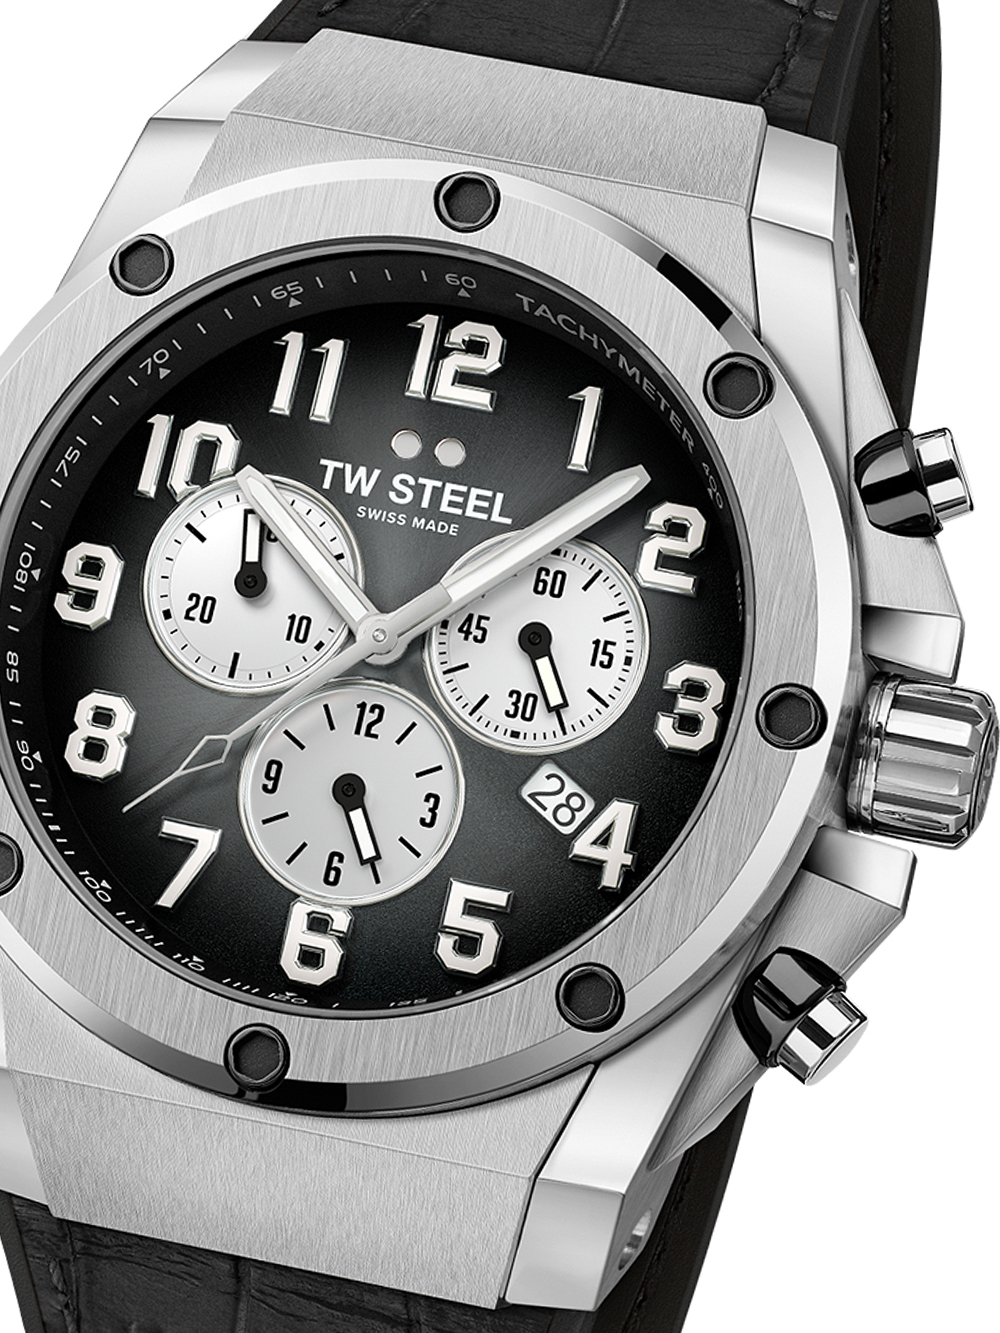 TW-Steel ACE130 ACE Genesis Chronograph Limited Edition 44mm